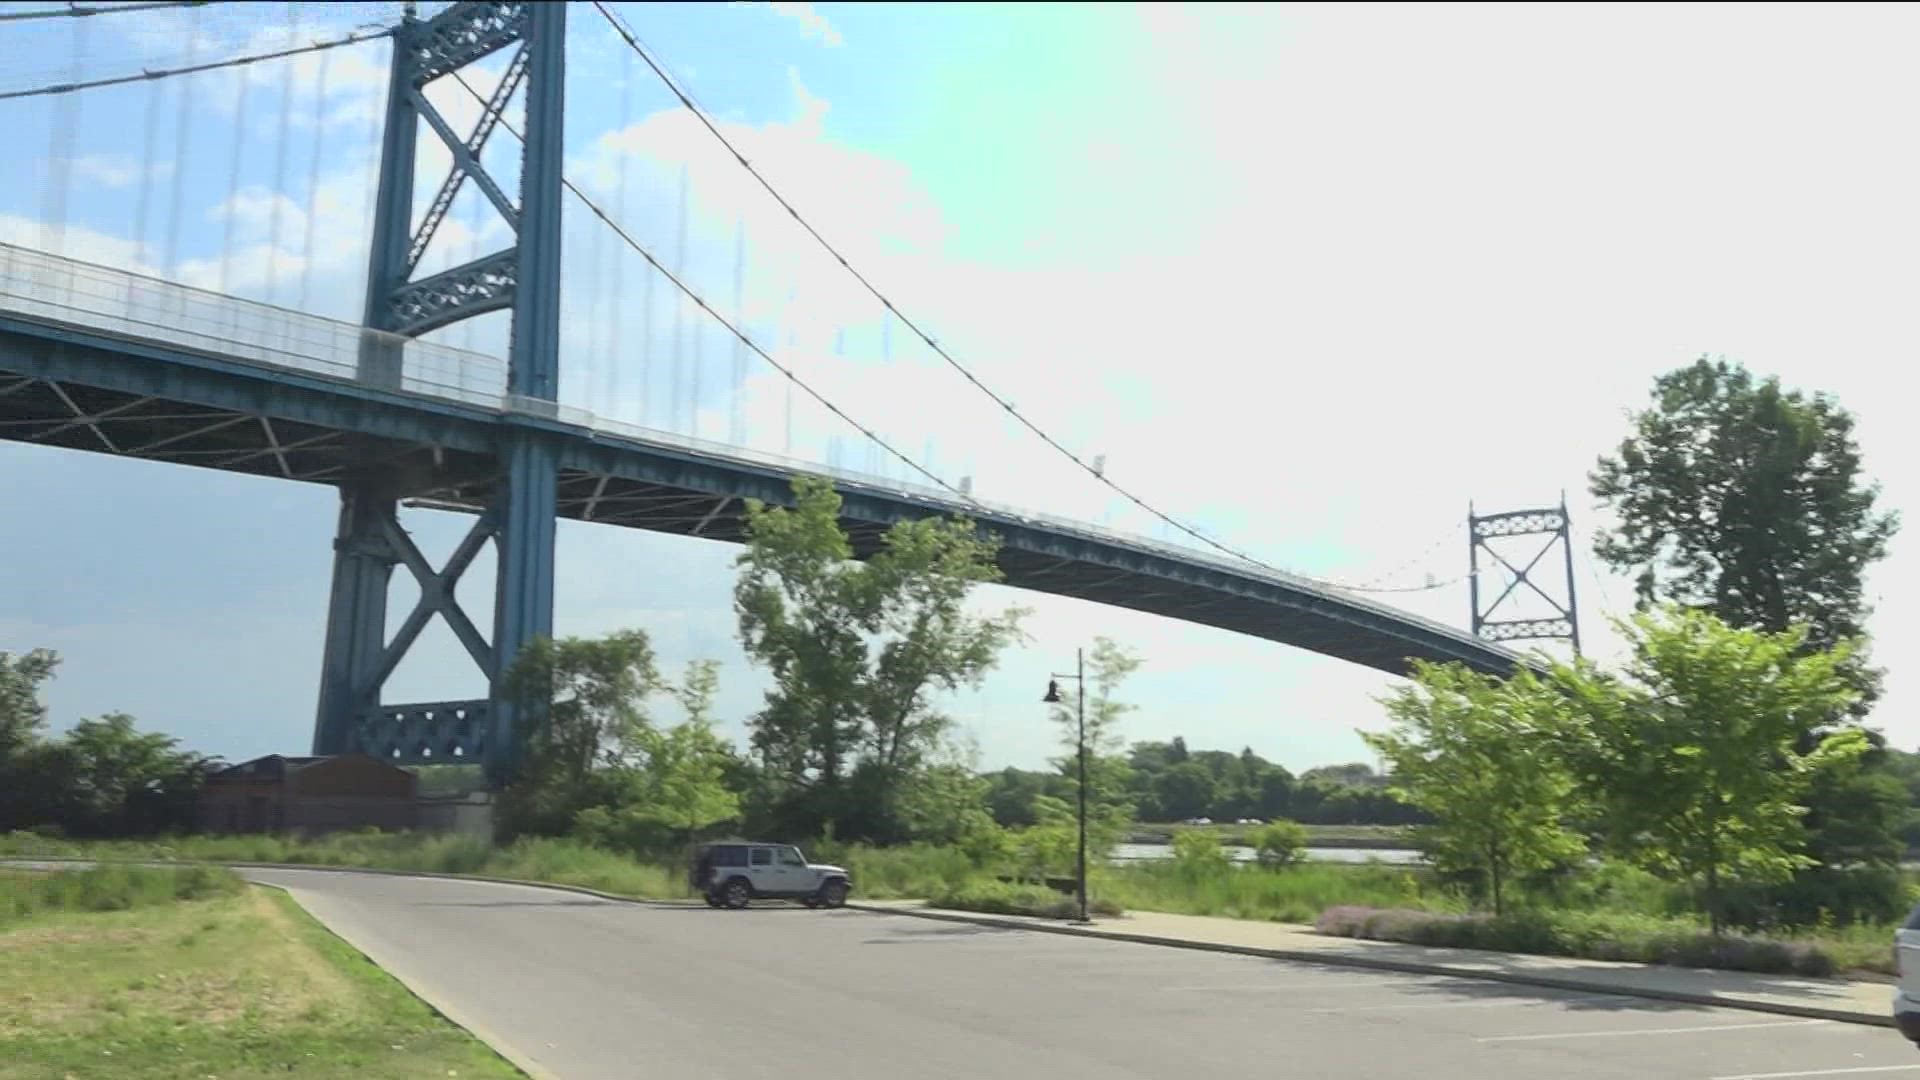 The American Society of Civil Engineers Toledo Section officially recognized the Anthony Wayne Bridge, built in 1931, as a civil engineering landmark.